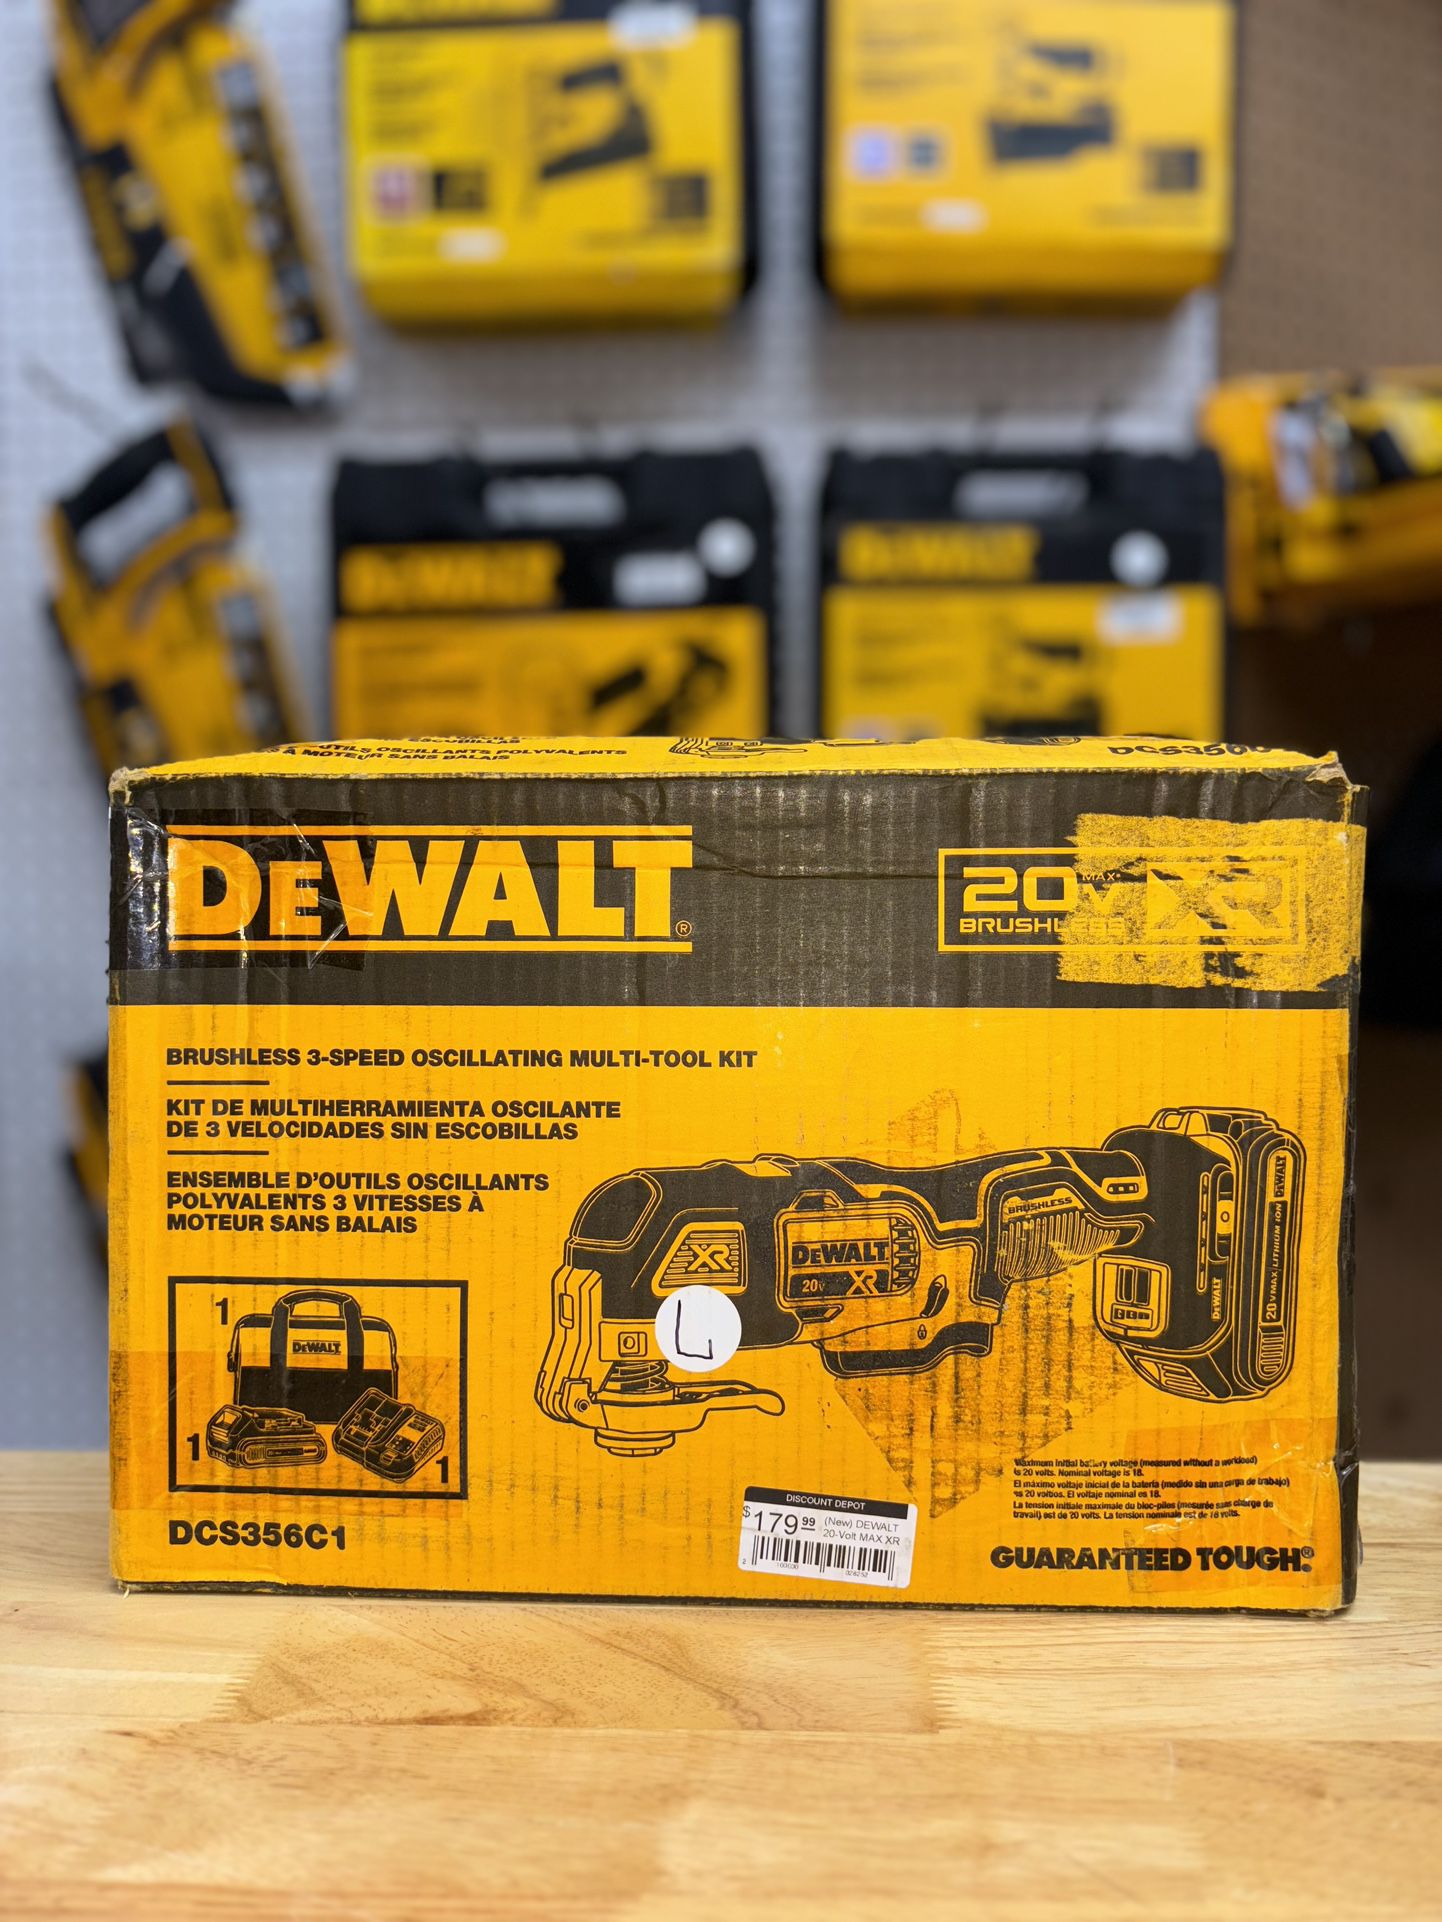 DEWALT 20V MAX XR Cordless Brushless 3-Speed Oscillating Multi Tool with (1) 20V 1.5Ah Battery and Charger